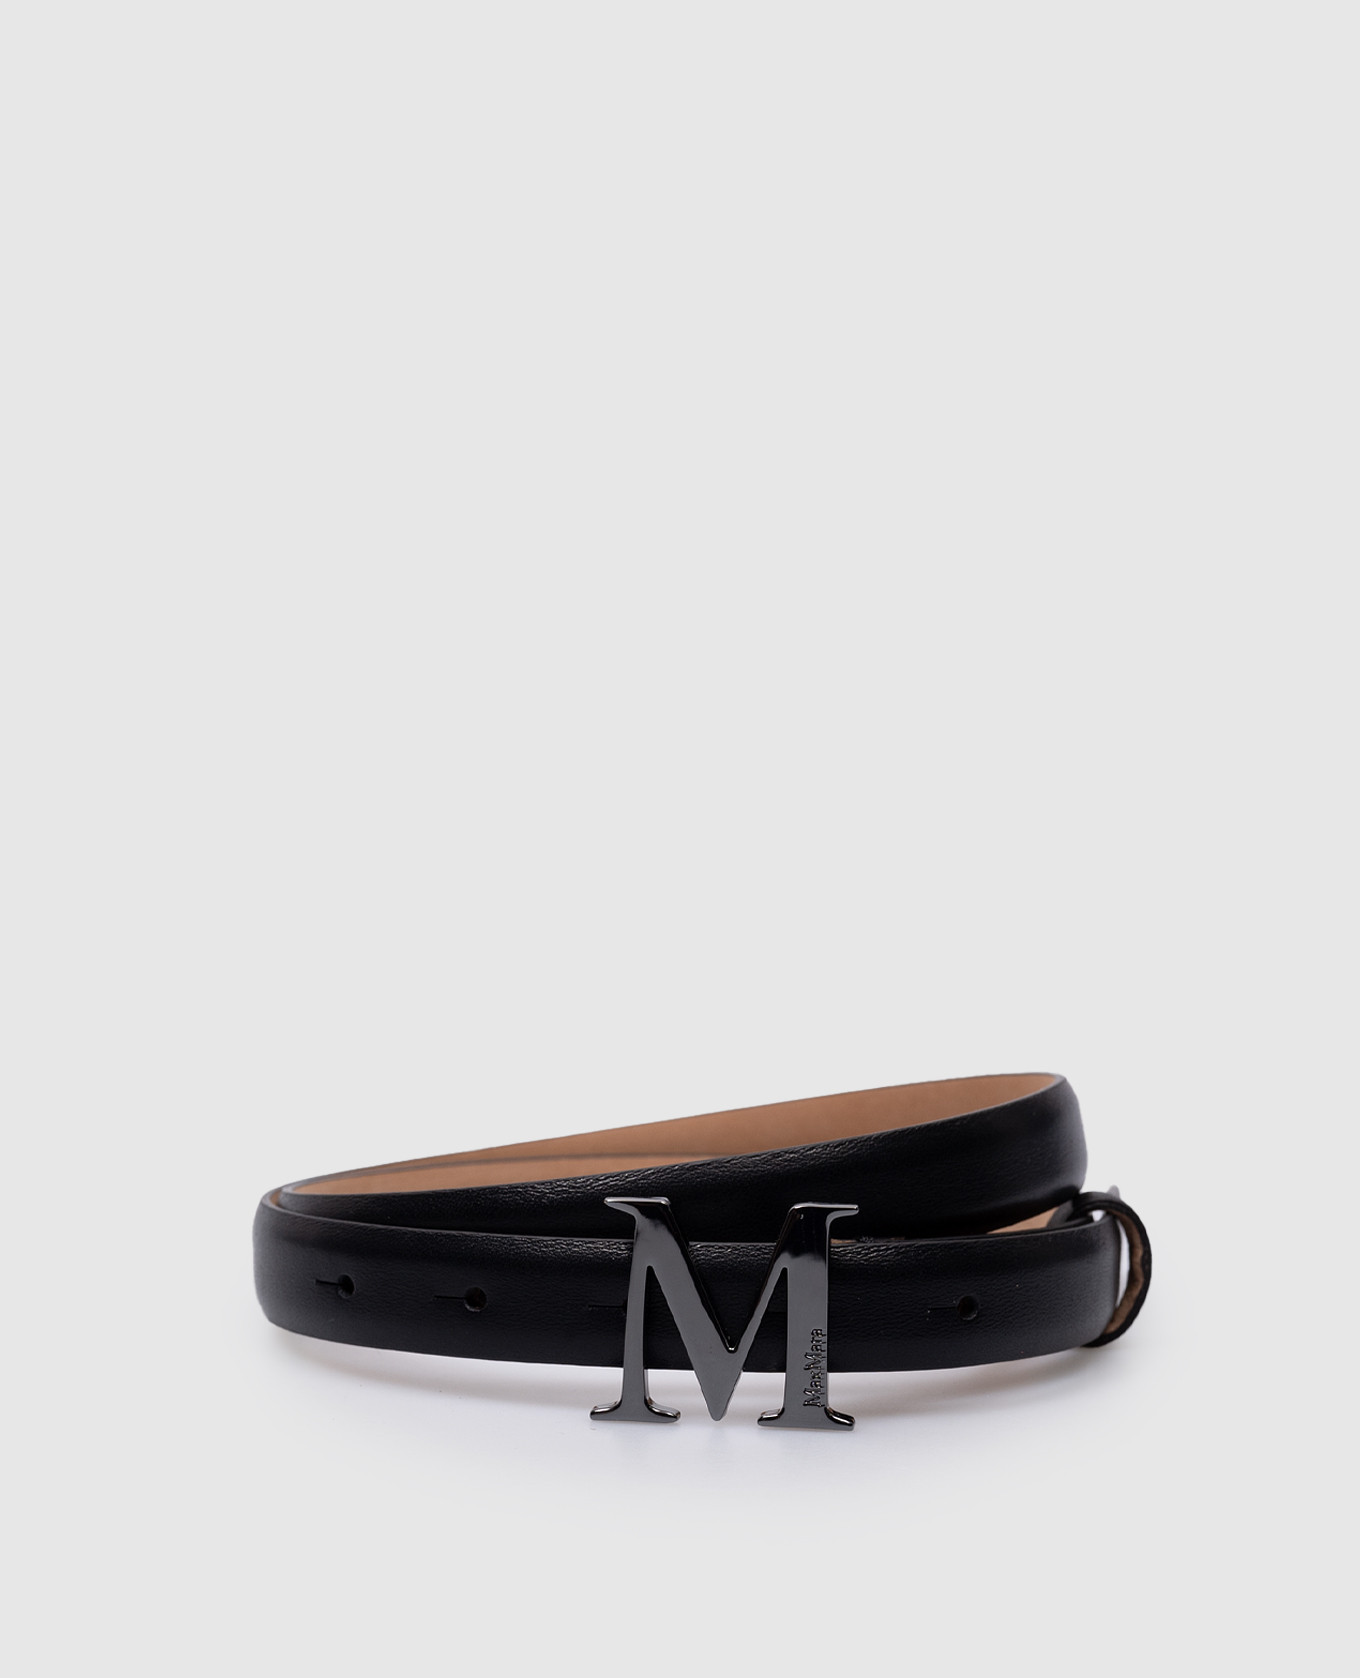 CLASSIC black leather belt with logo engraving